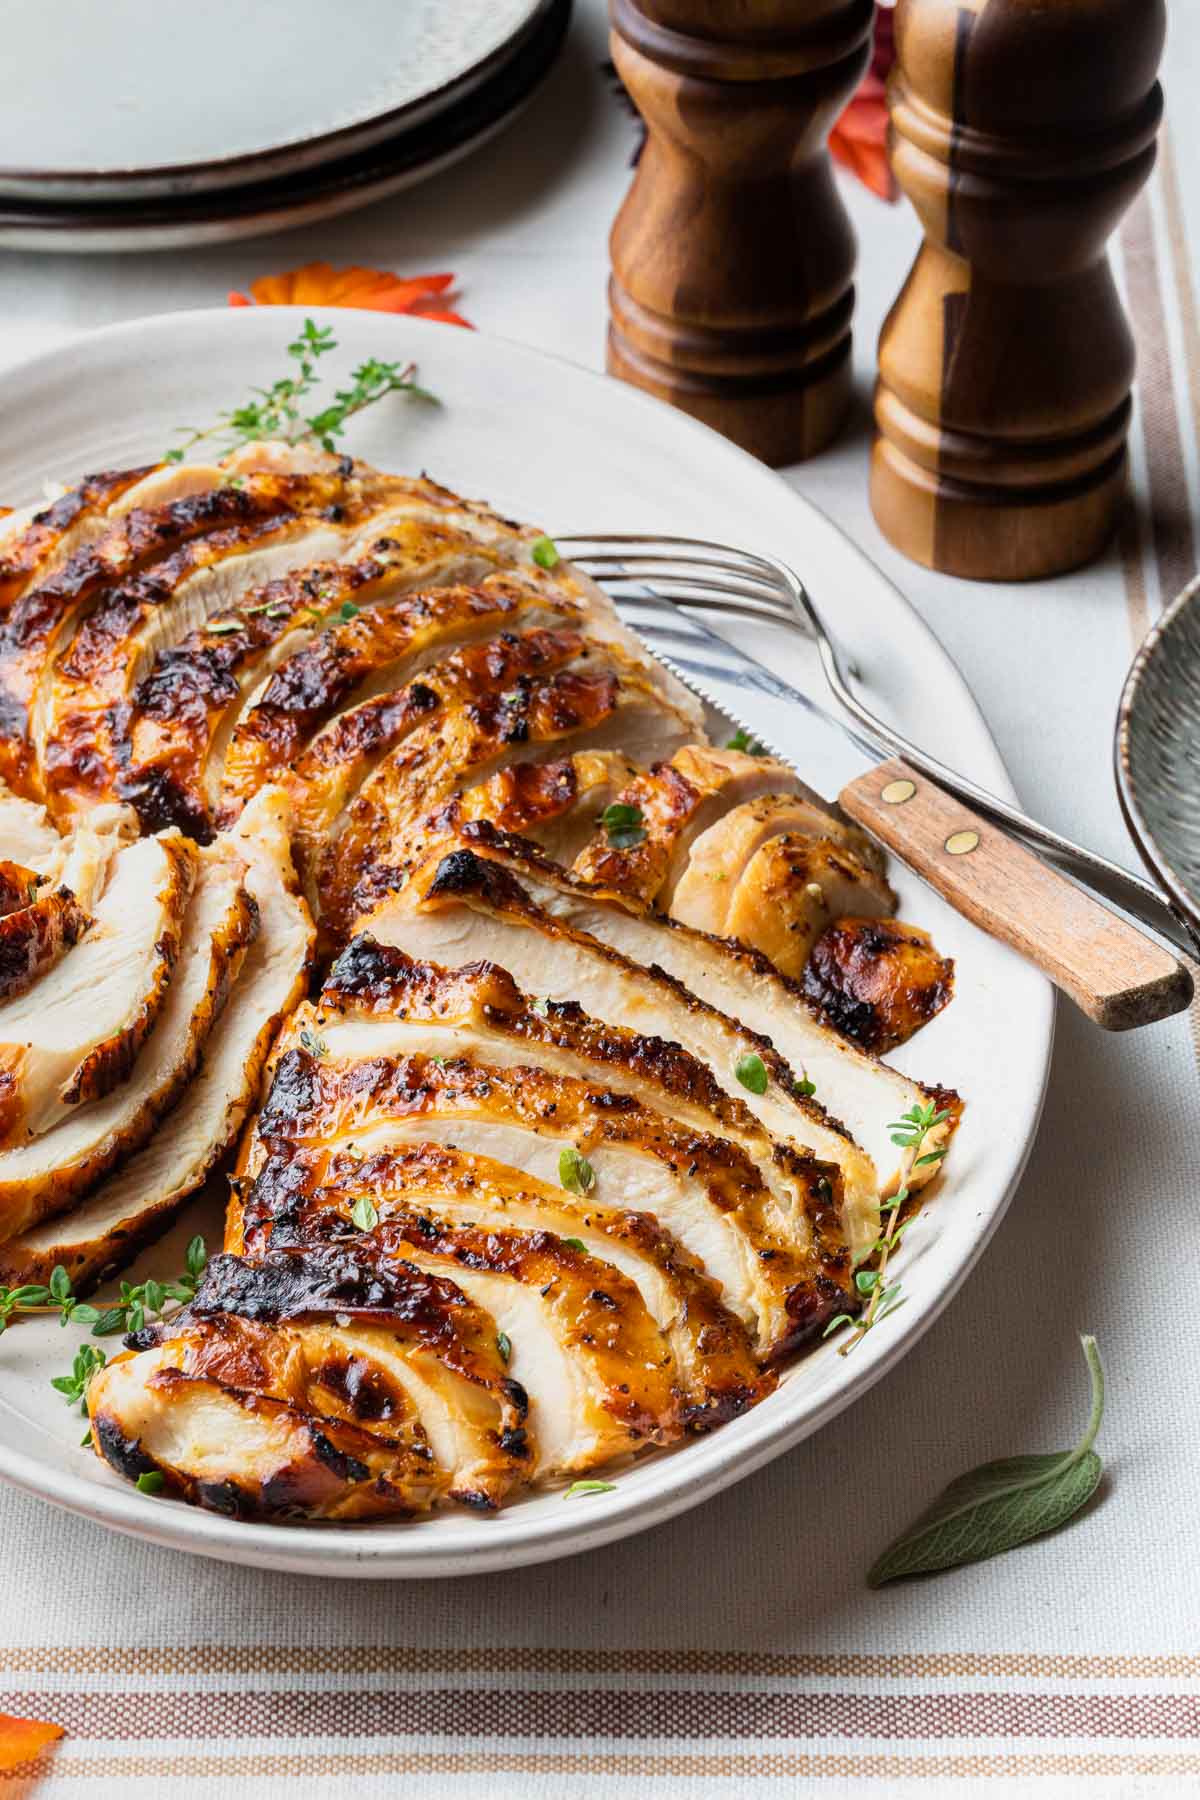 Grilled turkey breast on a platter sliced and ready to serve, a fork and knife resting on the platter.